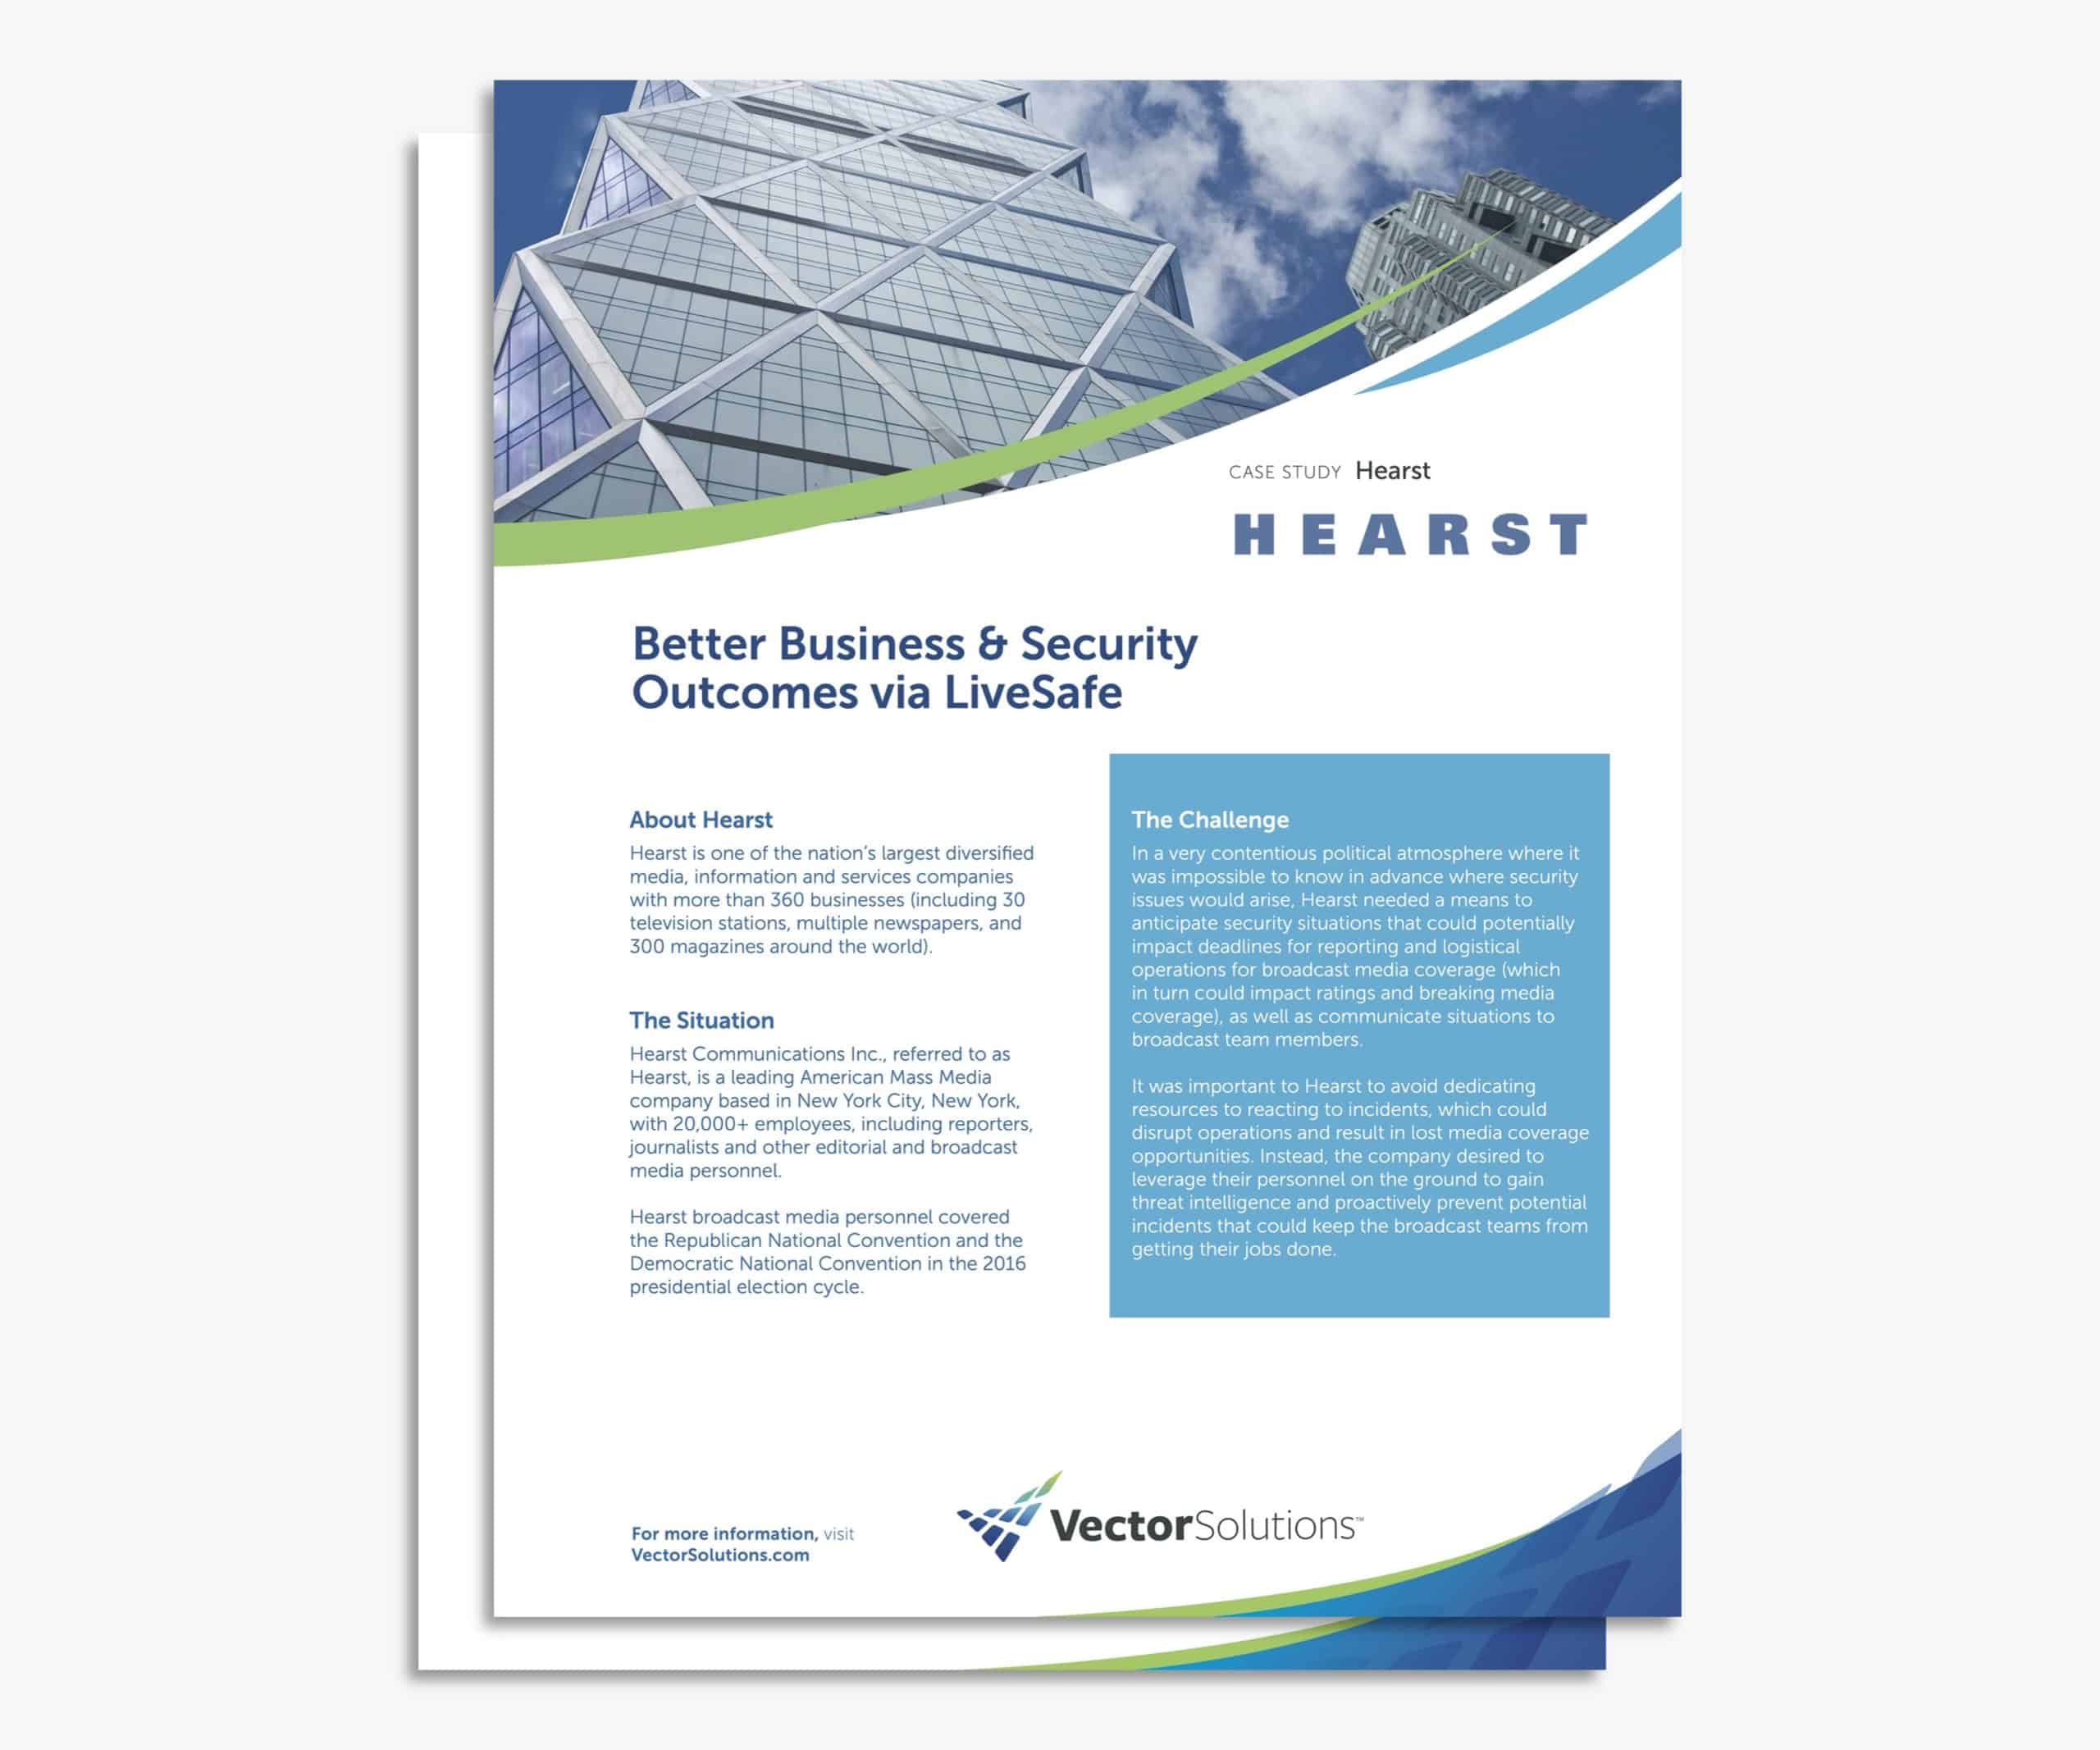 Hearst Case Study: Improving Business and Security Outcomes